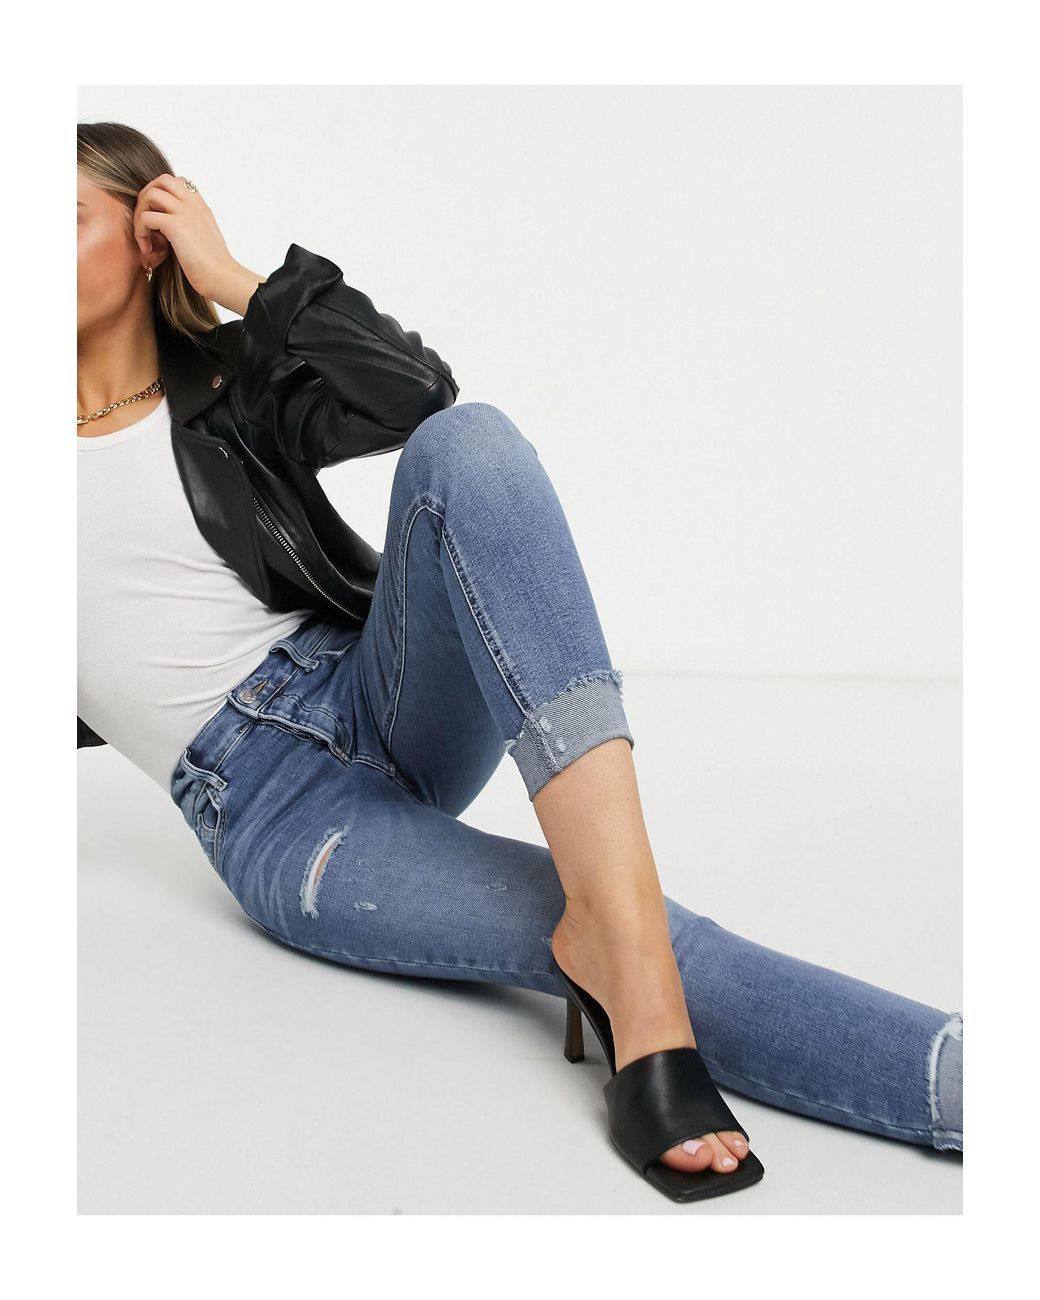 River Island Amelie Turnup Distressed Skinny Jeans in Blue | Lyst